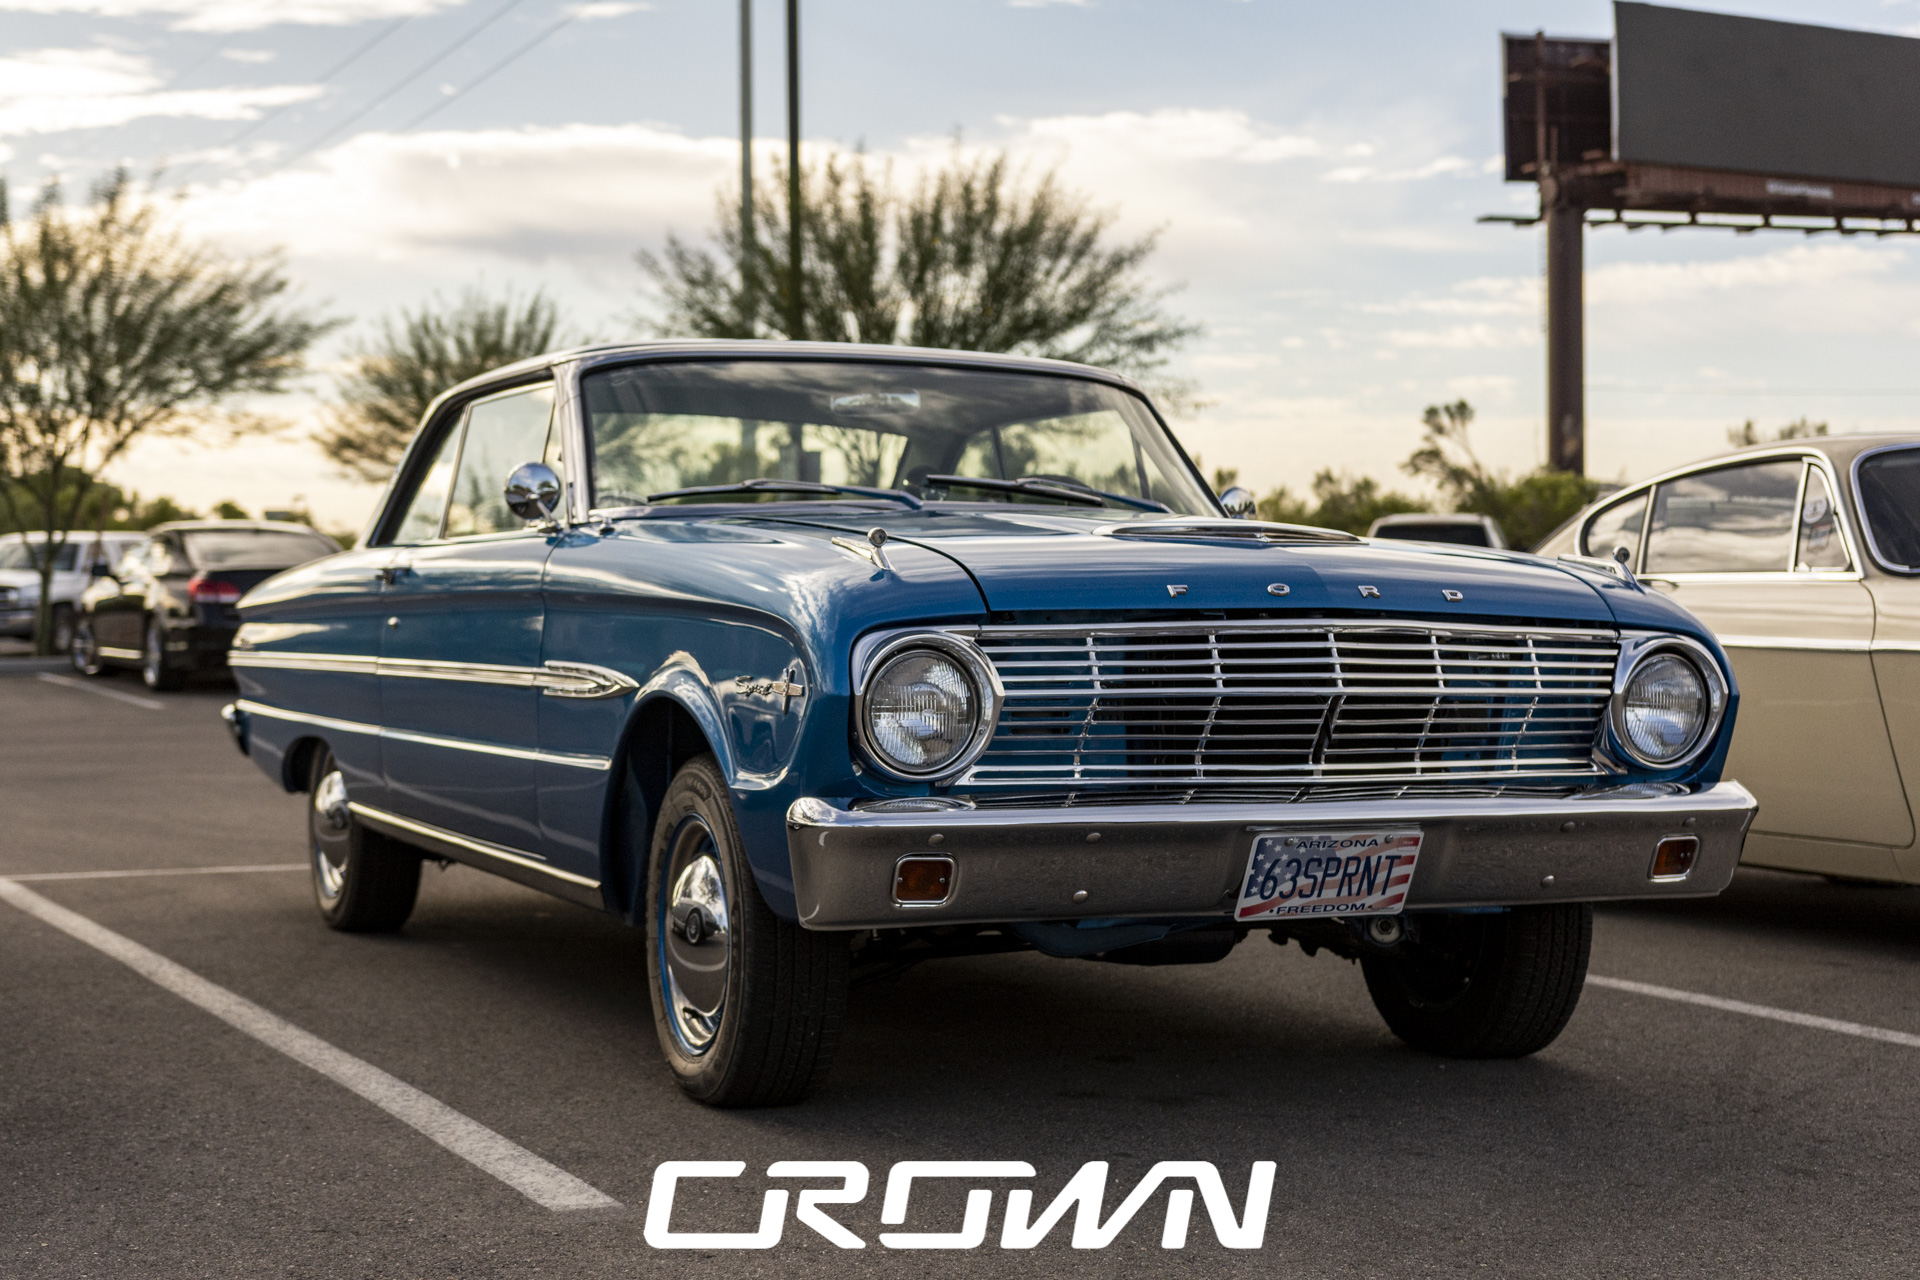 1963 Ford Falcon Sprint at Cars and coffee and clubs Tucson Arizona